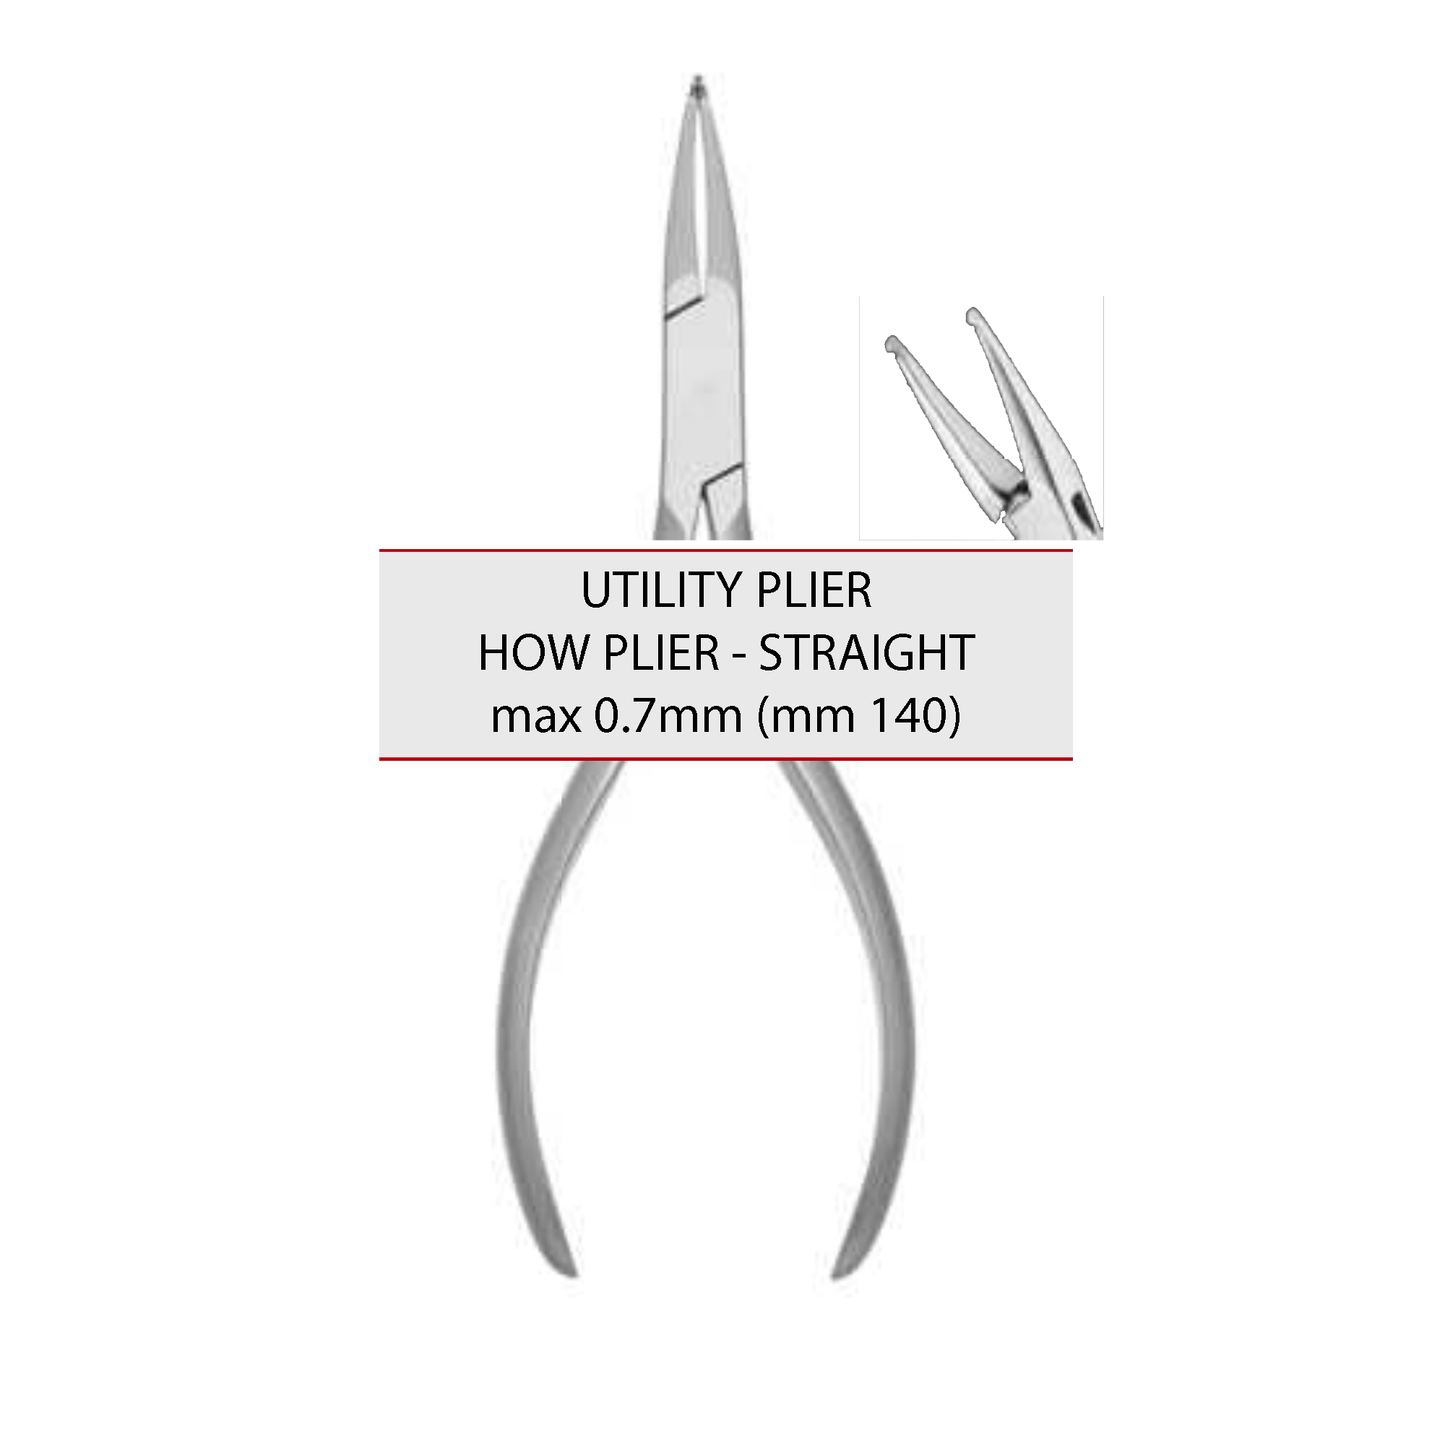 HOW PLIER STRAIGHT – MAX 0.7mm (mm 140) cod 1024-4